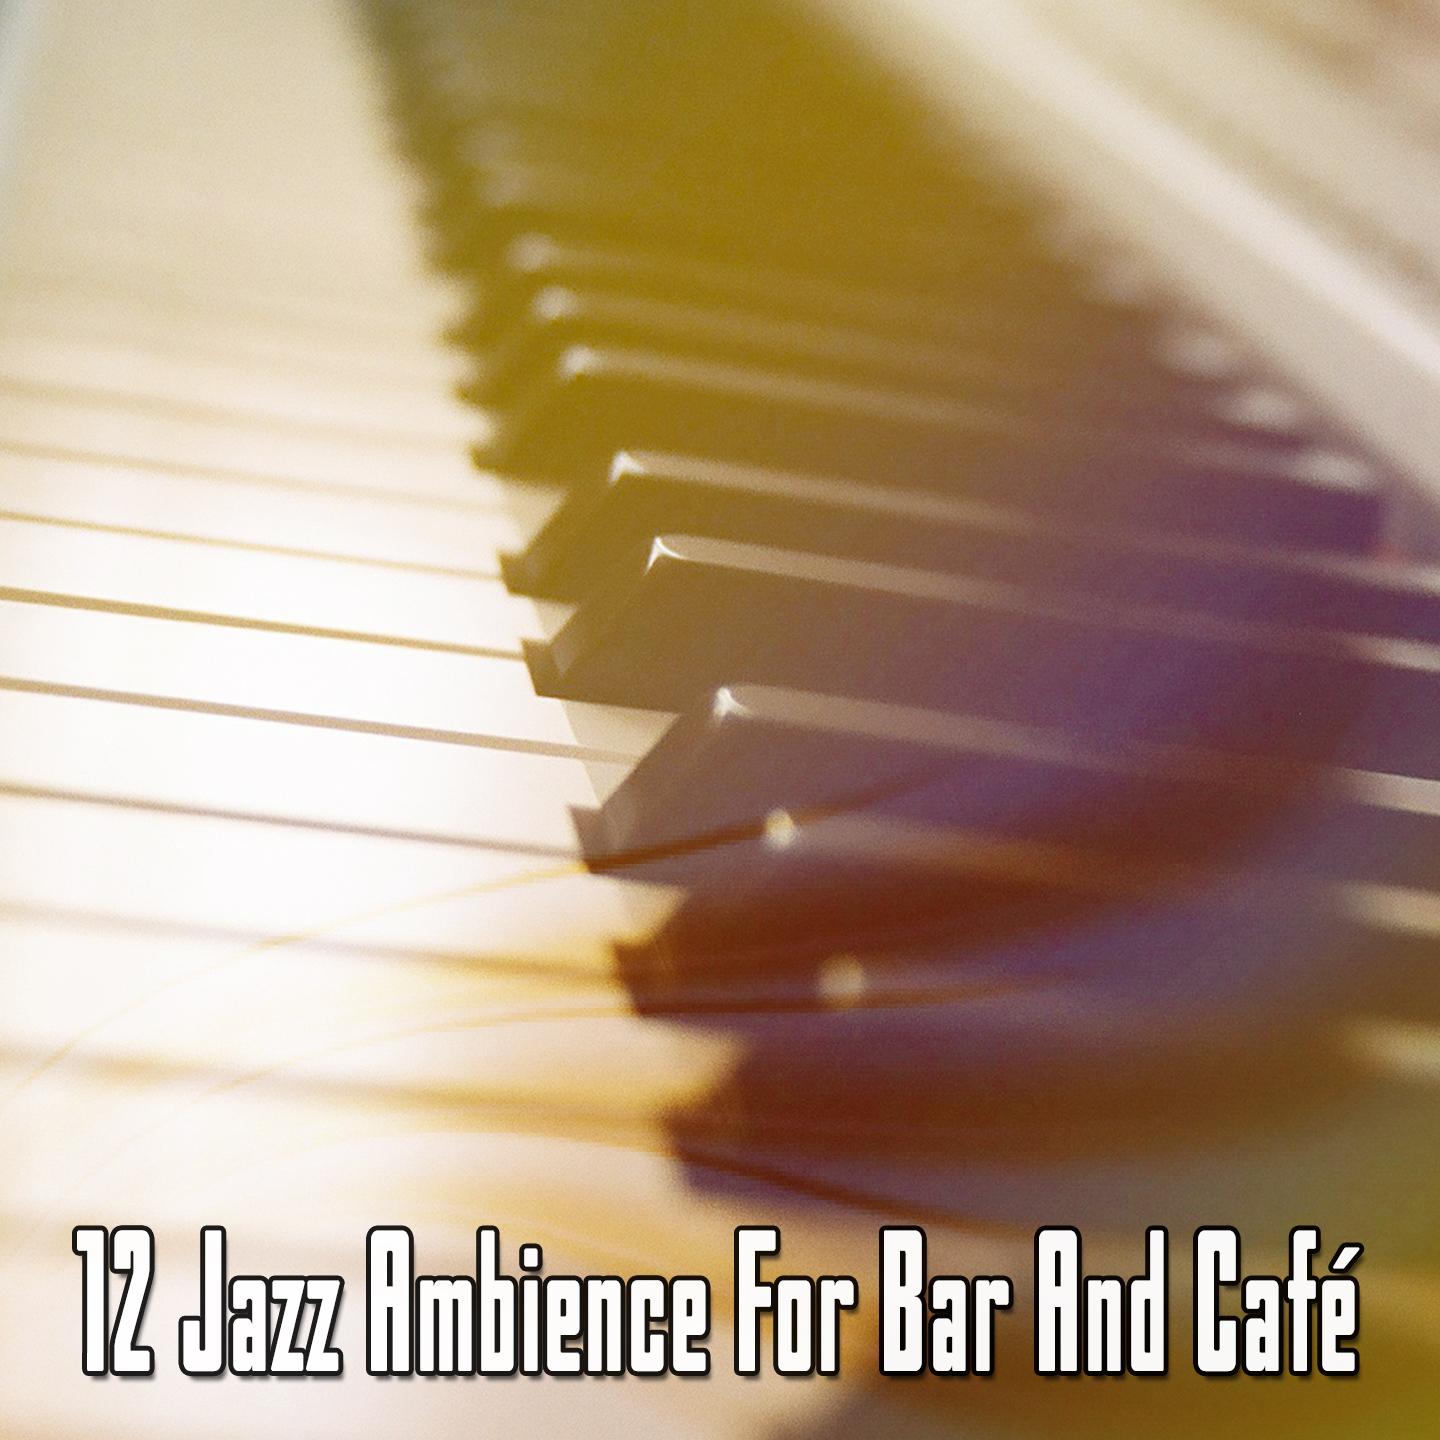 12 Jazz Ambience For Bar And Cafe